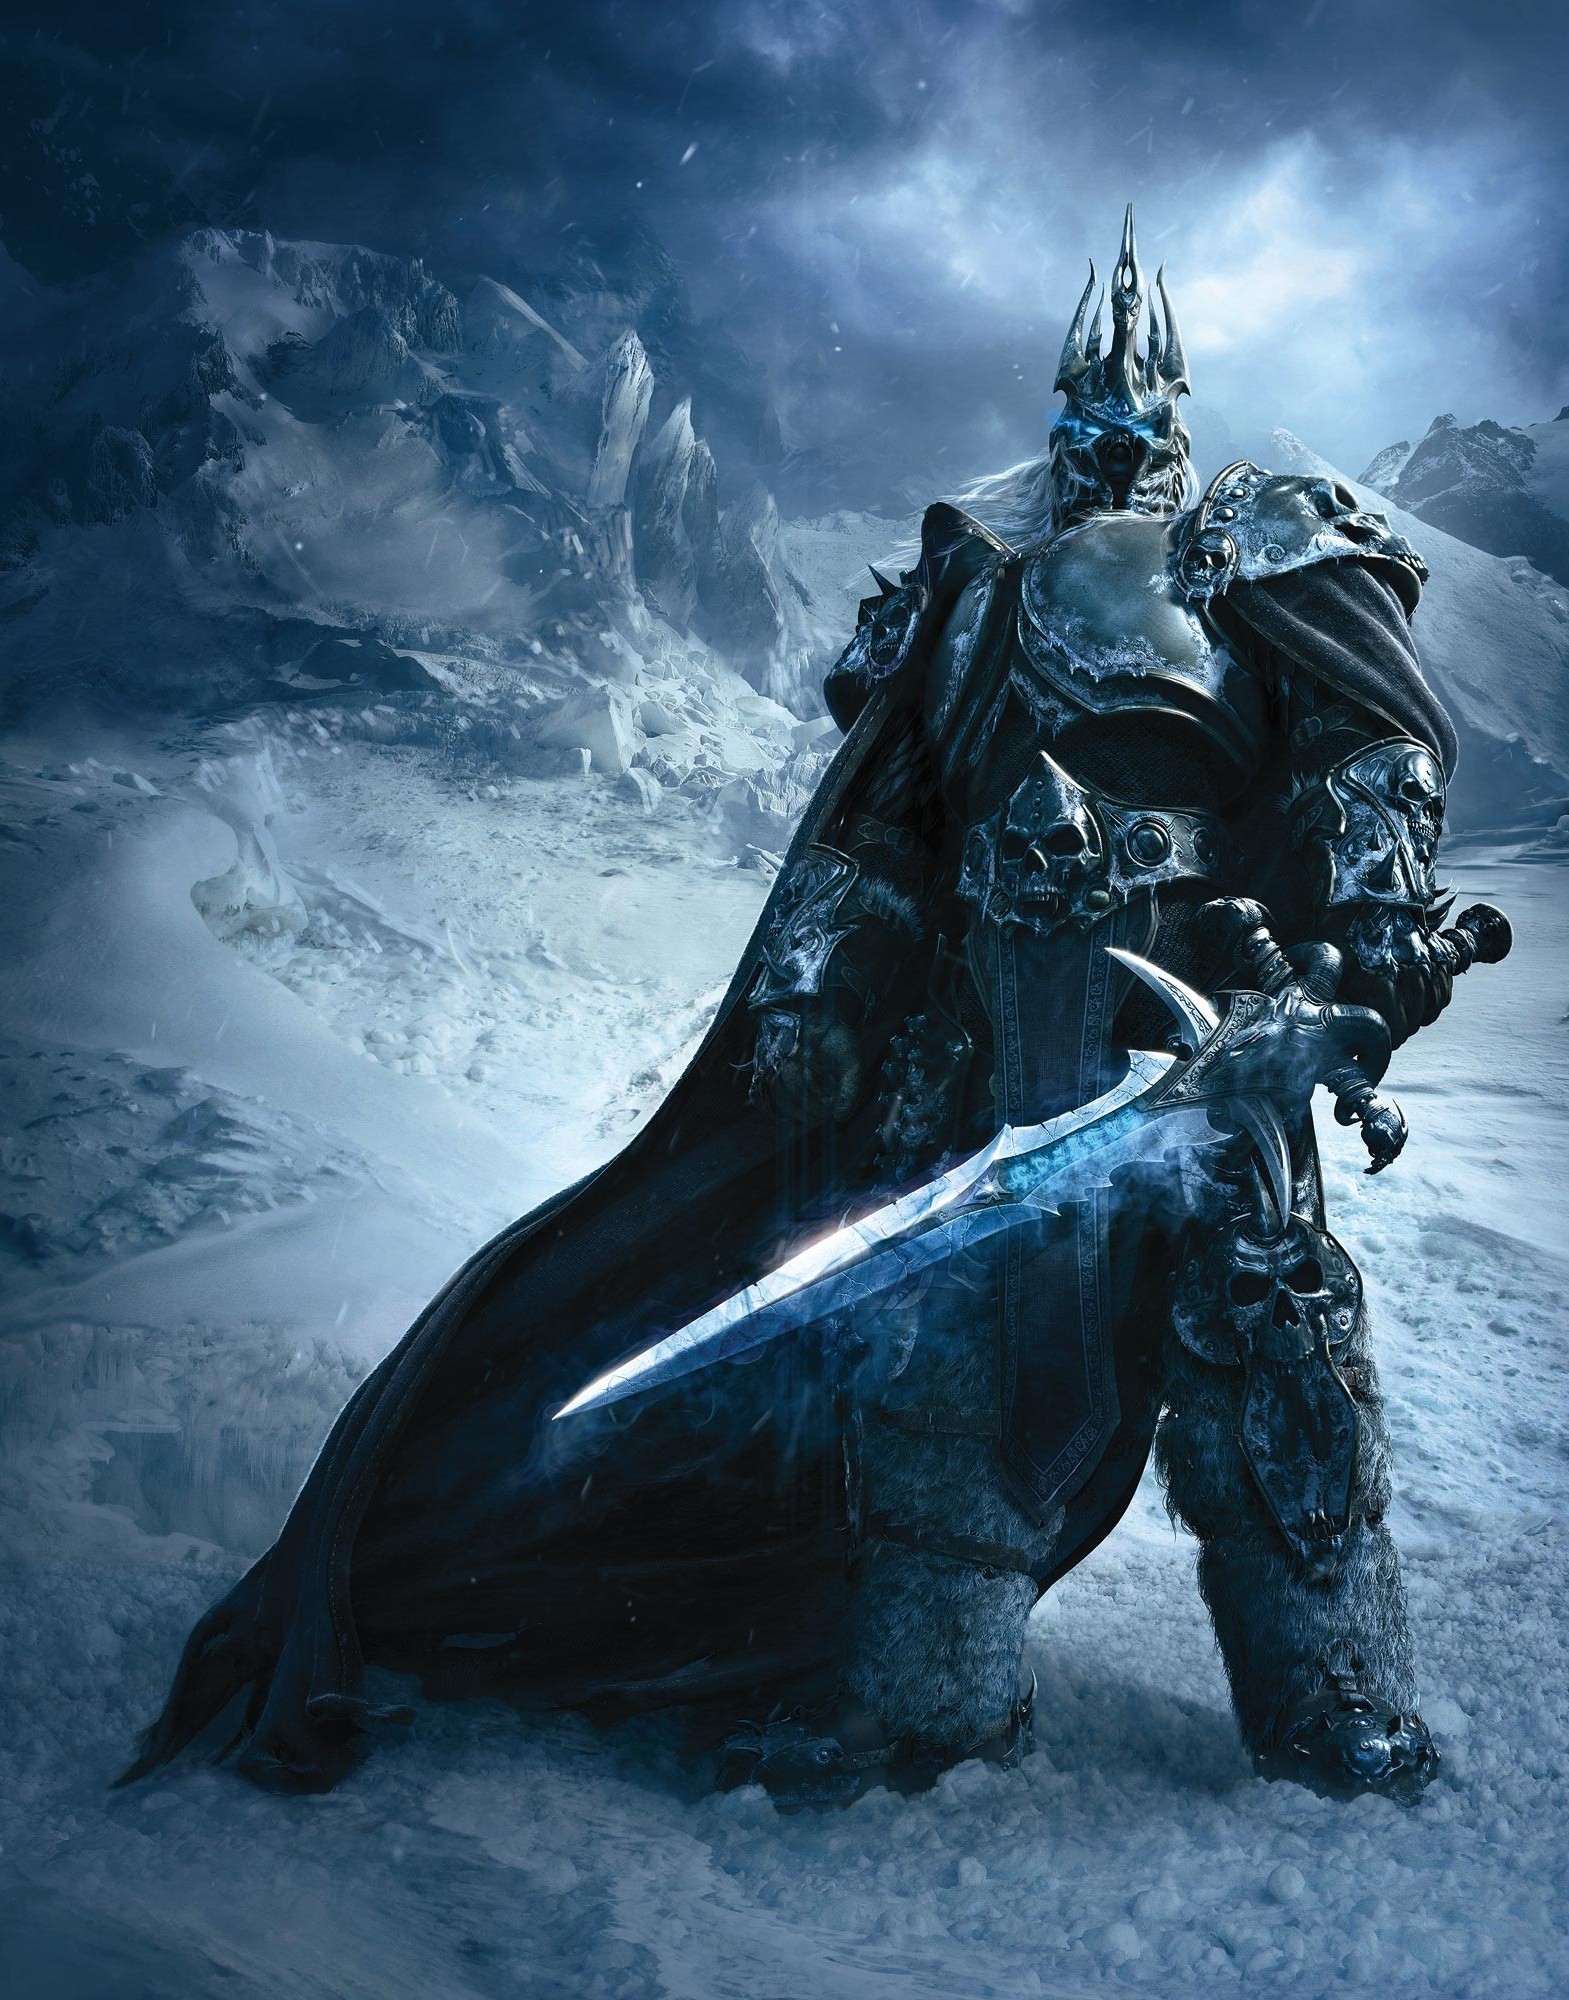 download wow lich king for free mac